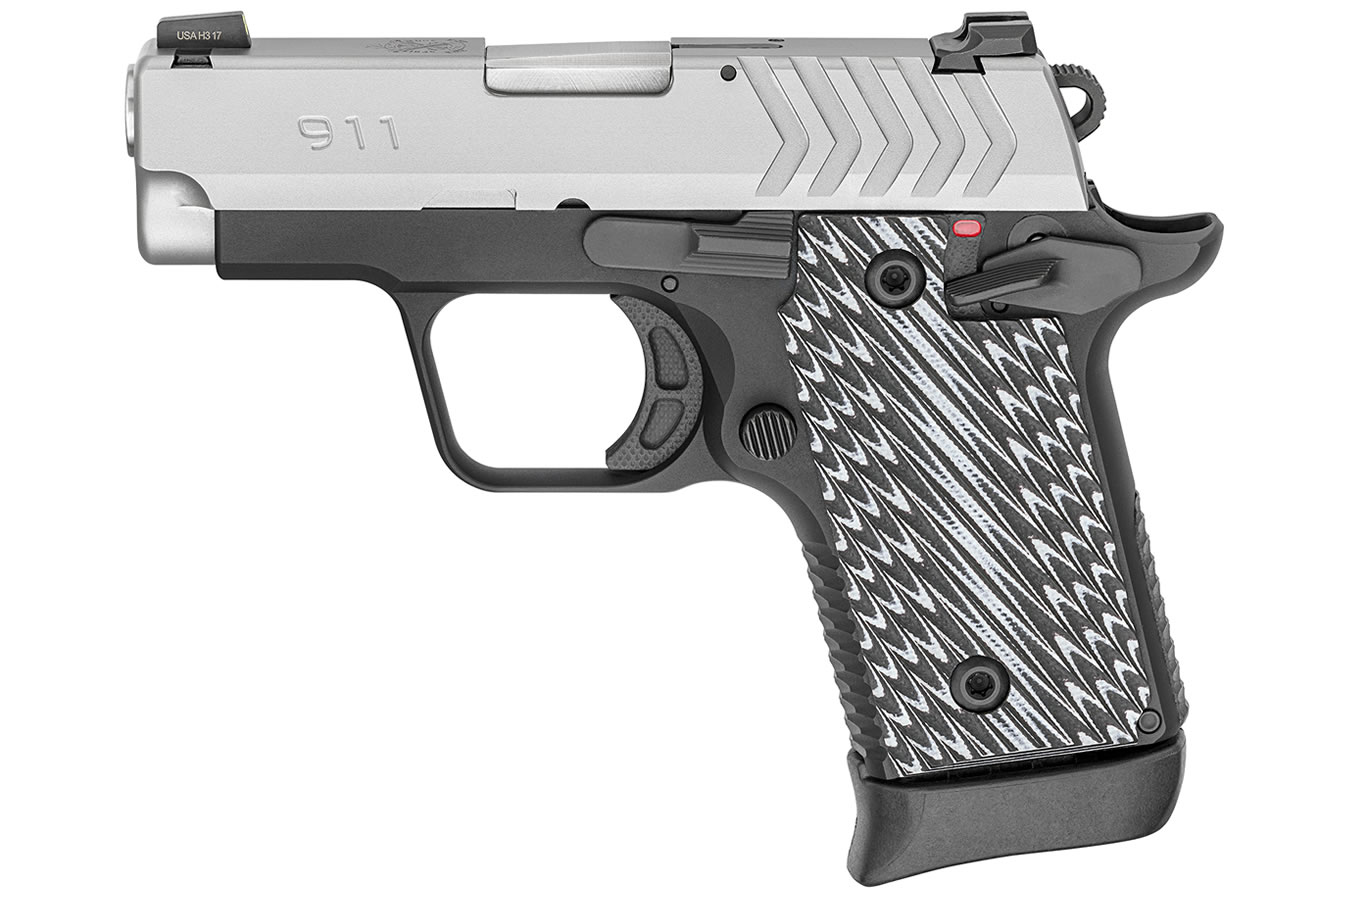 SPRINGFIELD 911 380 ACP STAINLESS GEAR UP PACKAGE